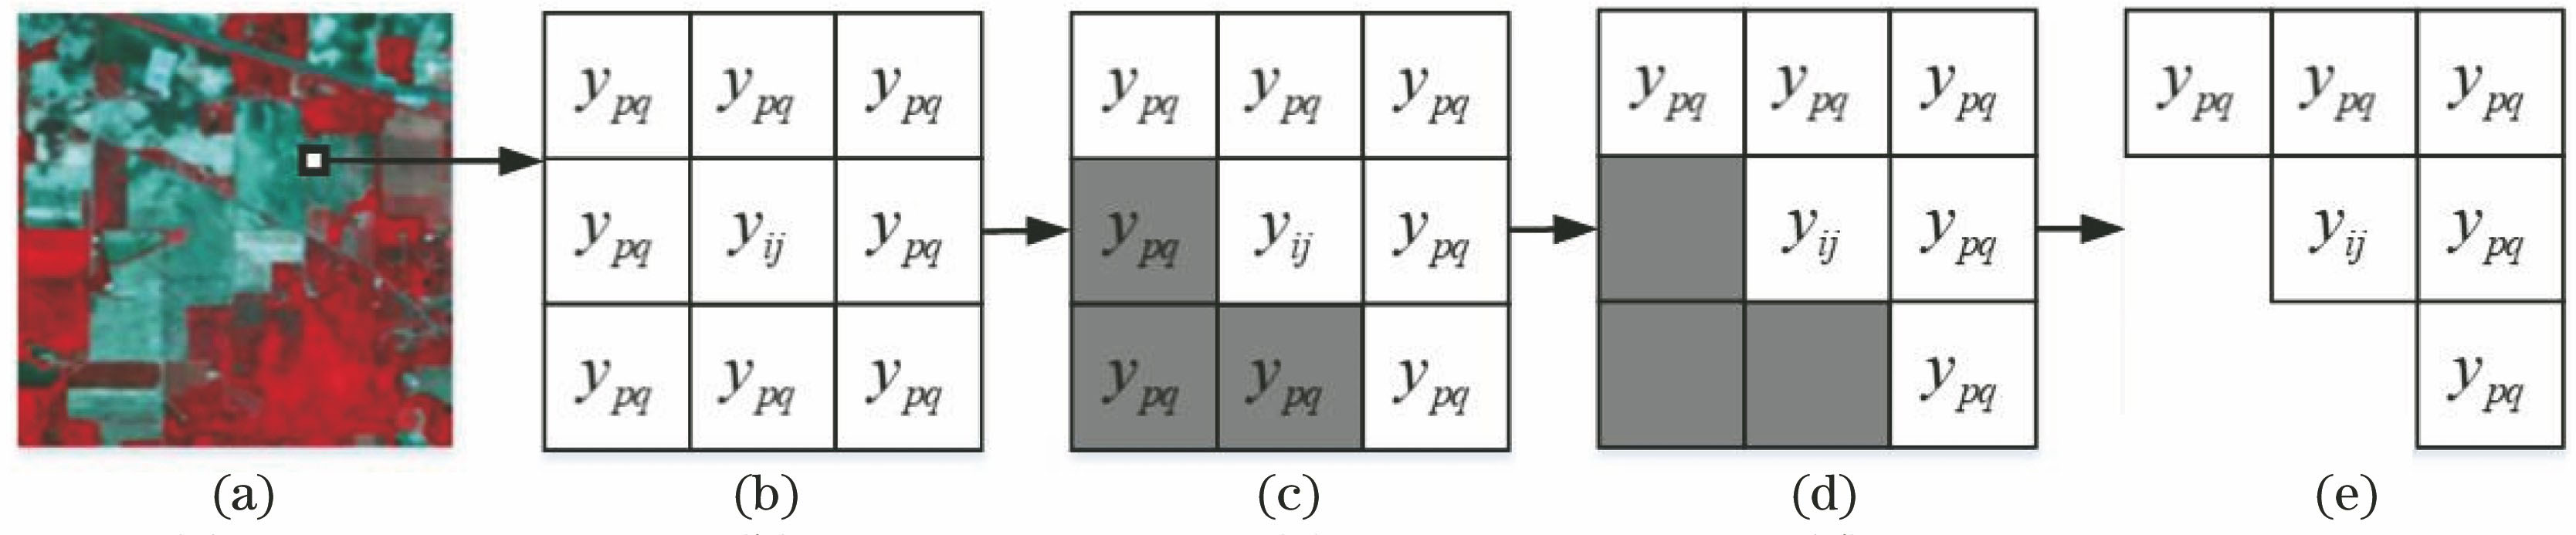 Process of removing background point. (a) Original image; (b) random sample points; (c) non-nearest neighbor sample points; (d) processing non-nearest neighbor sample points; (e) filtered sample points